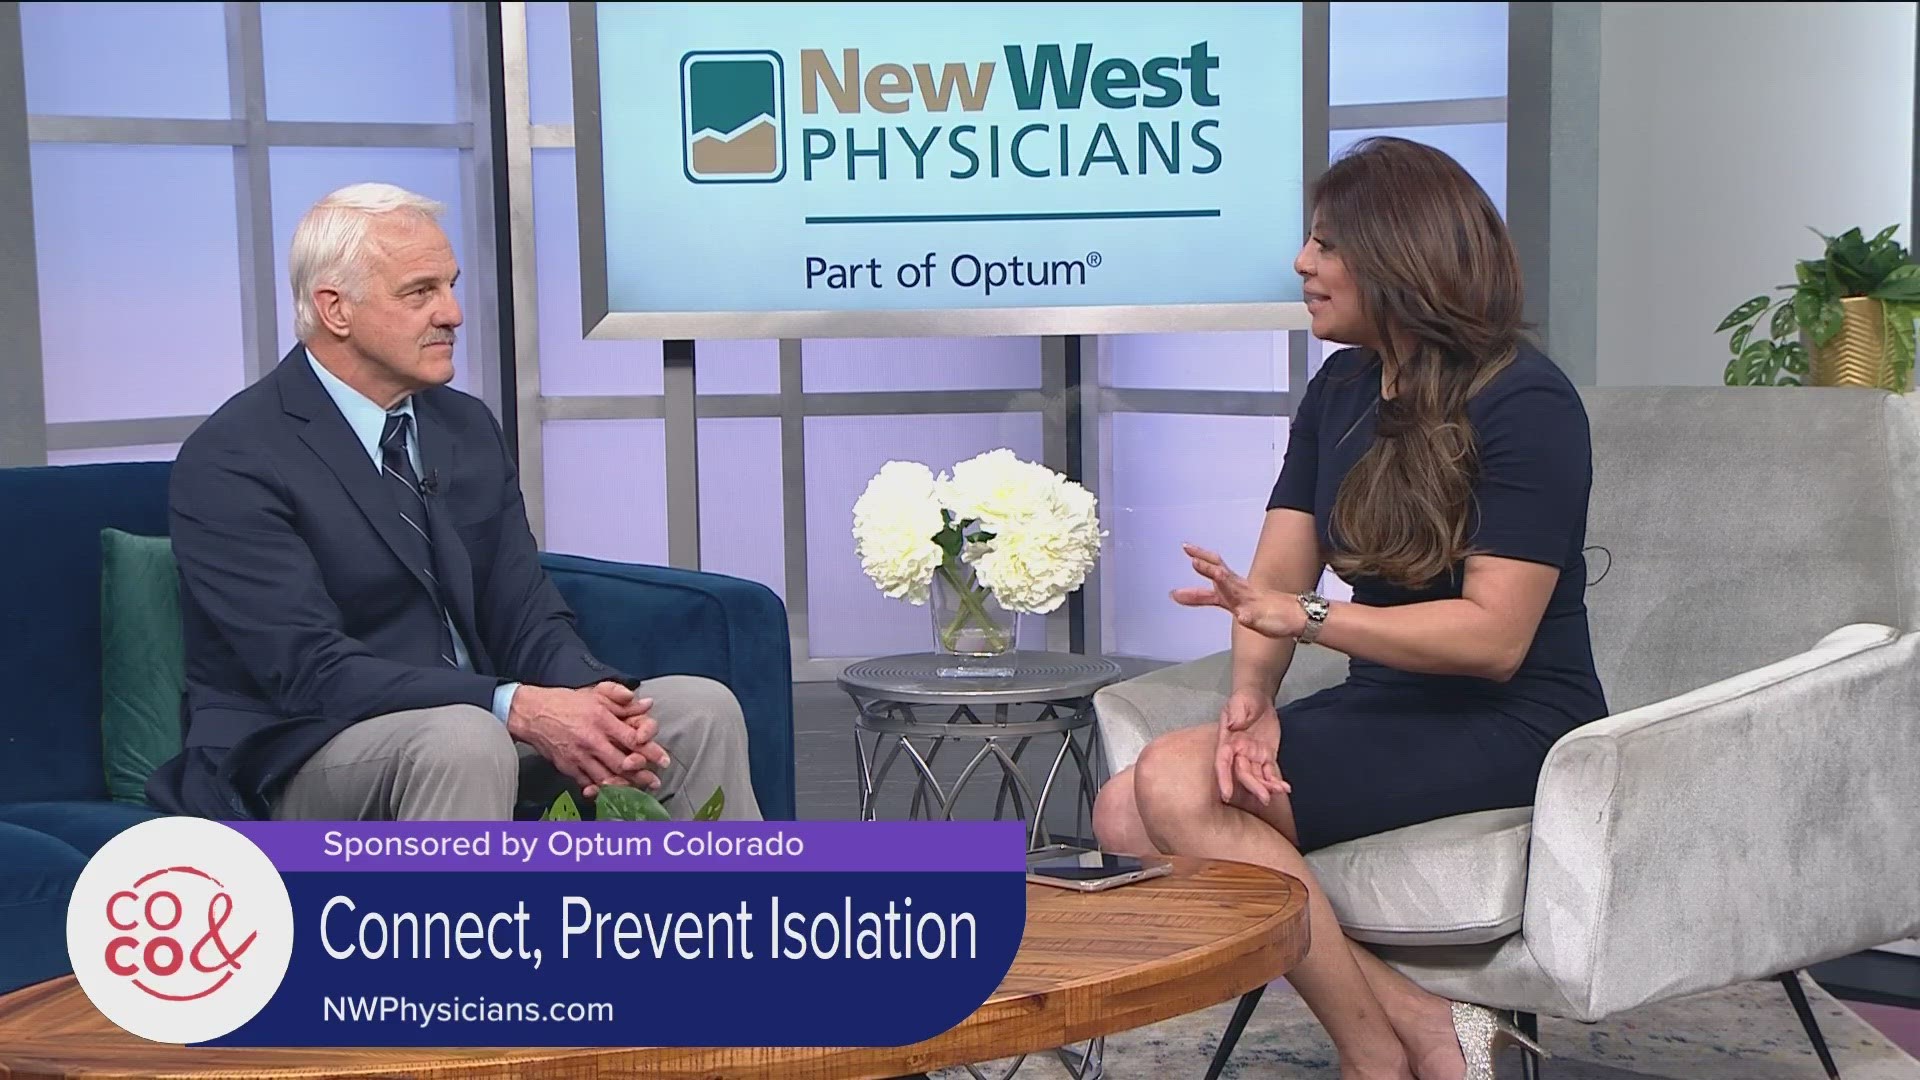 Feelings of isolation and loneliness, especially in older adults, is a ripple effect of the pandemic. Dr. James Yeash of New West Physicians is here to help.  *PAID*